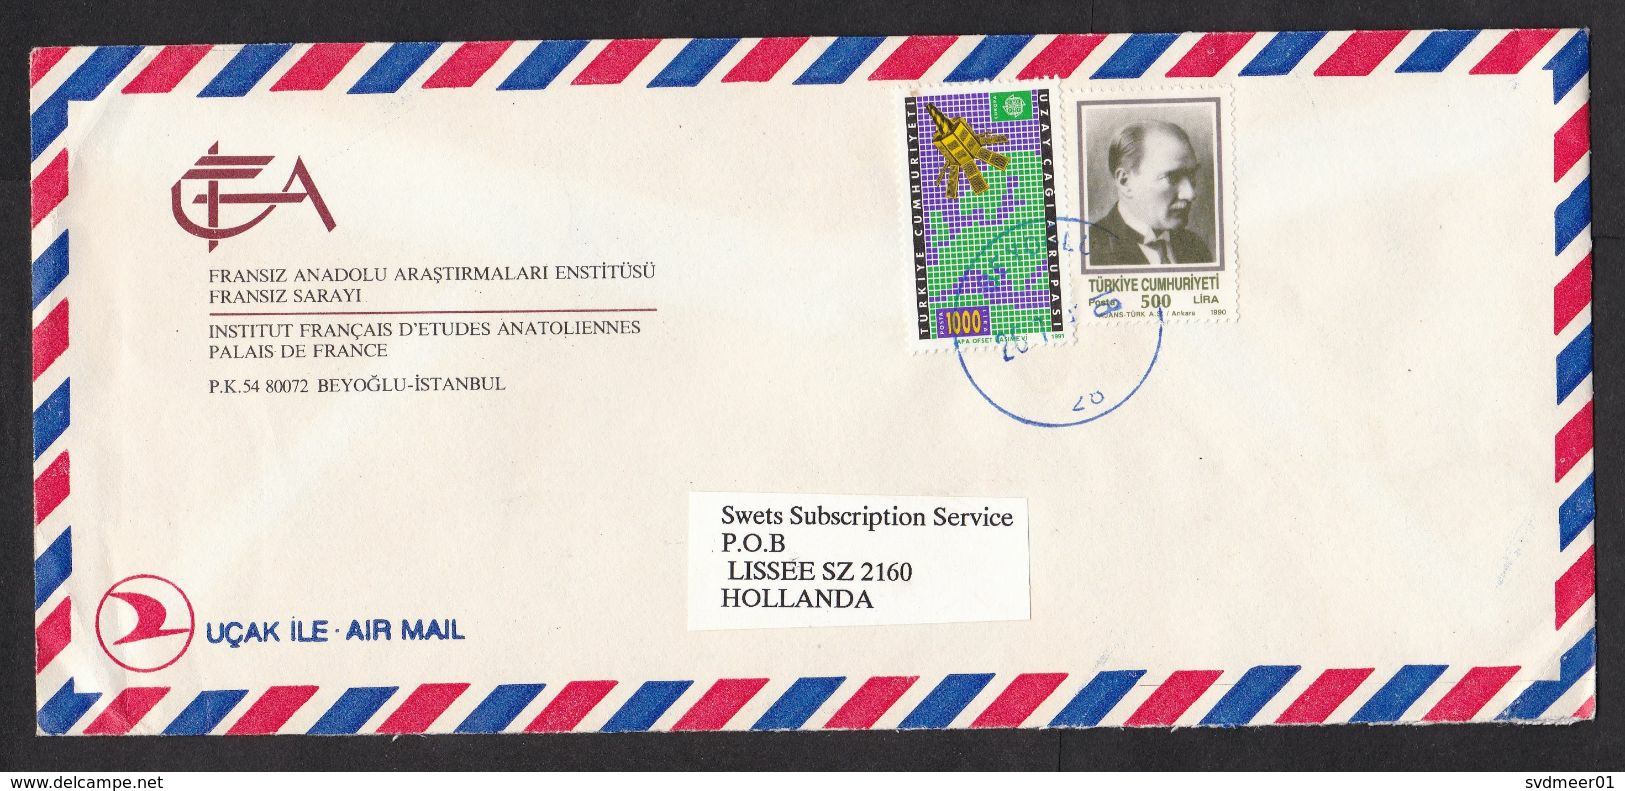 Turkey: Airmail Cover To Netherlands, 1991, 2 Stamps, Satellite, Space, CEPT, Europa (minor Damage) - Briefe U. Dokumente